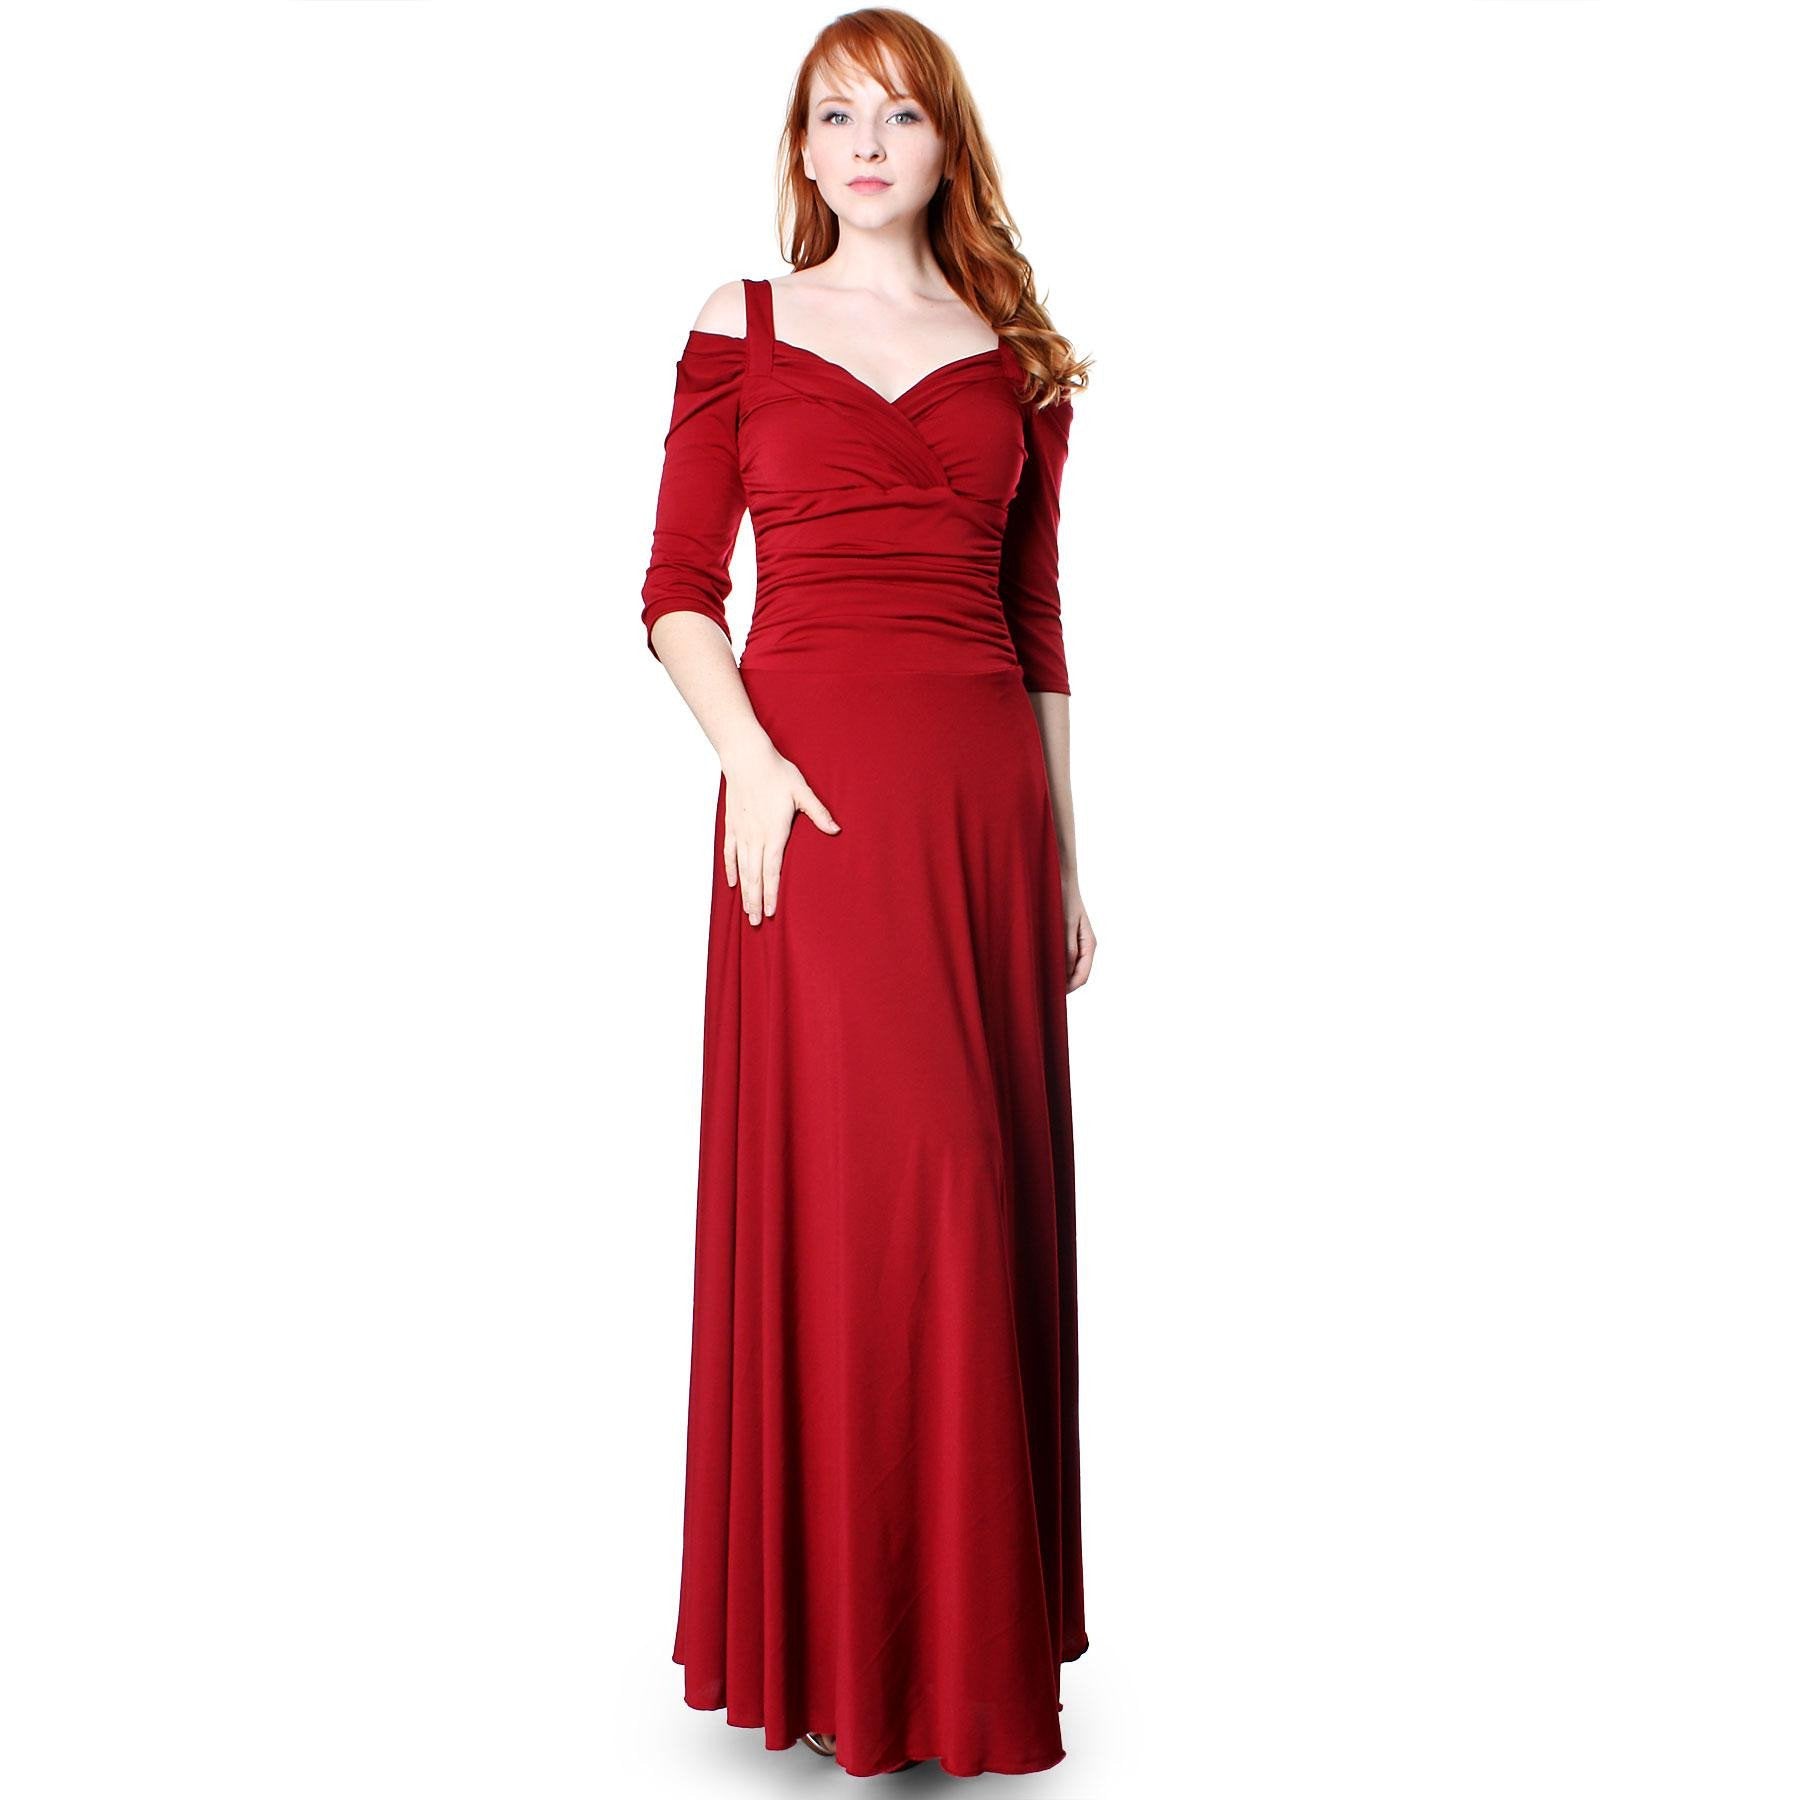 Evanese Women's Plus Size Elegant Long Formal Evening Dress with 3/4  Sleeves 